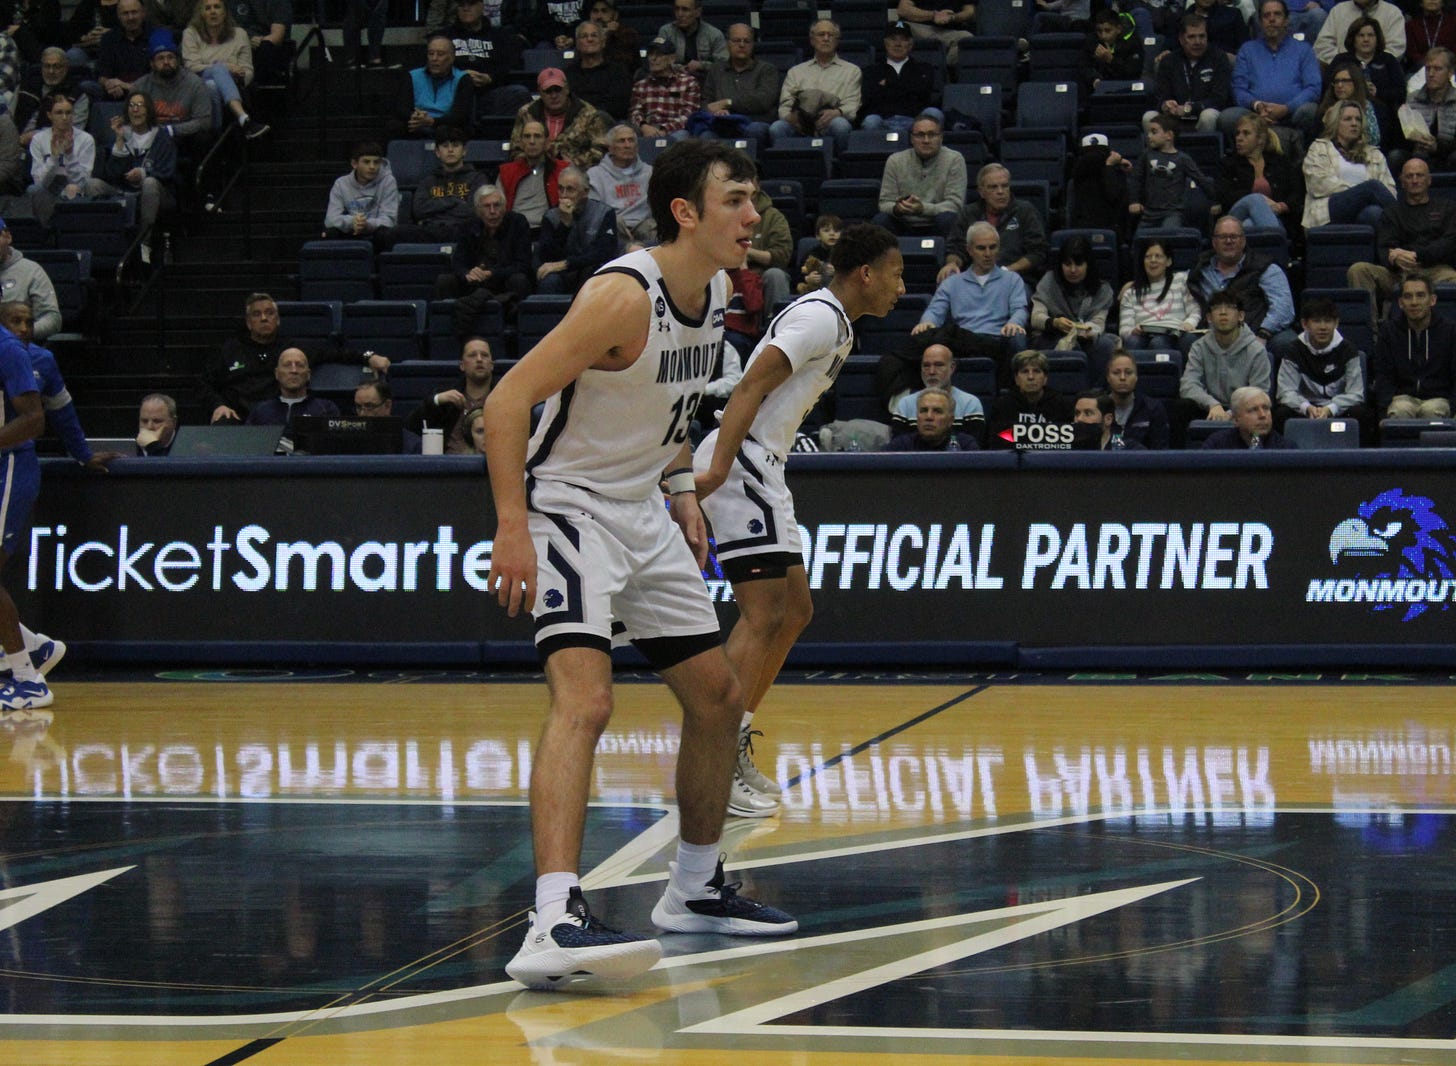 Jack Collins (13) prepares to play defense for Monmouth during a game on Feb. 11, 2023. (Photo by Adam Zielonka)